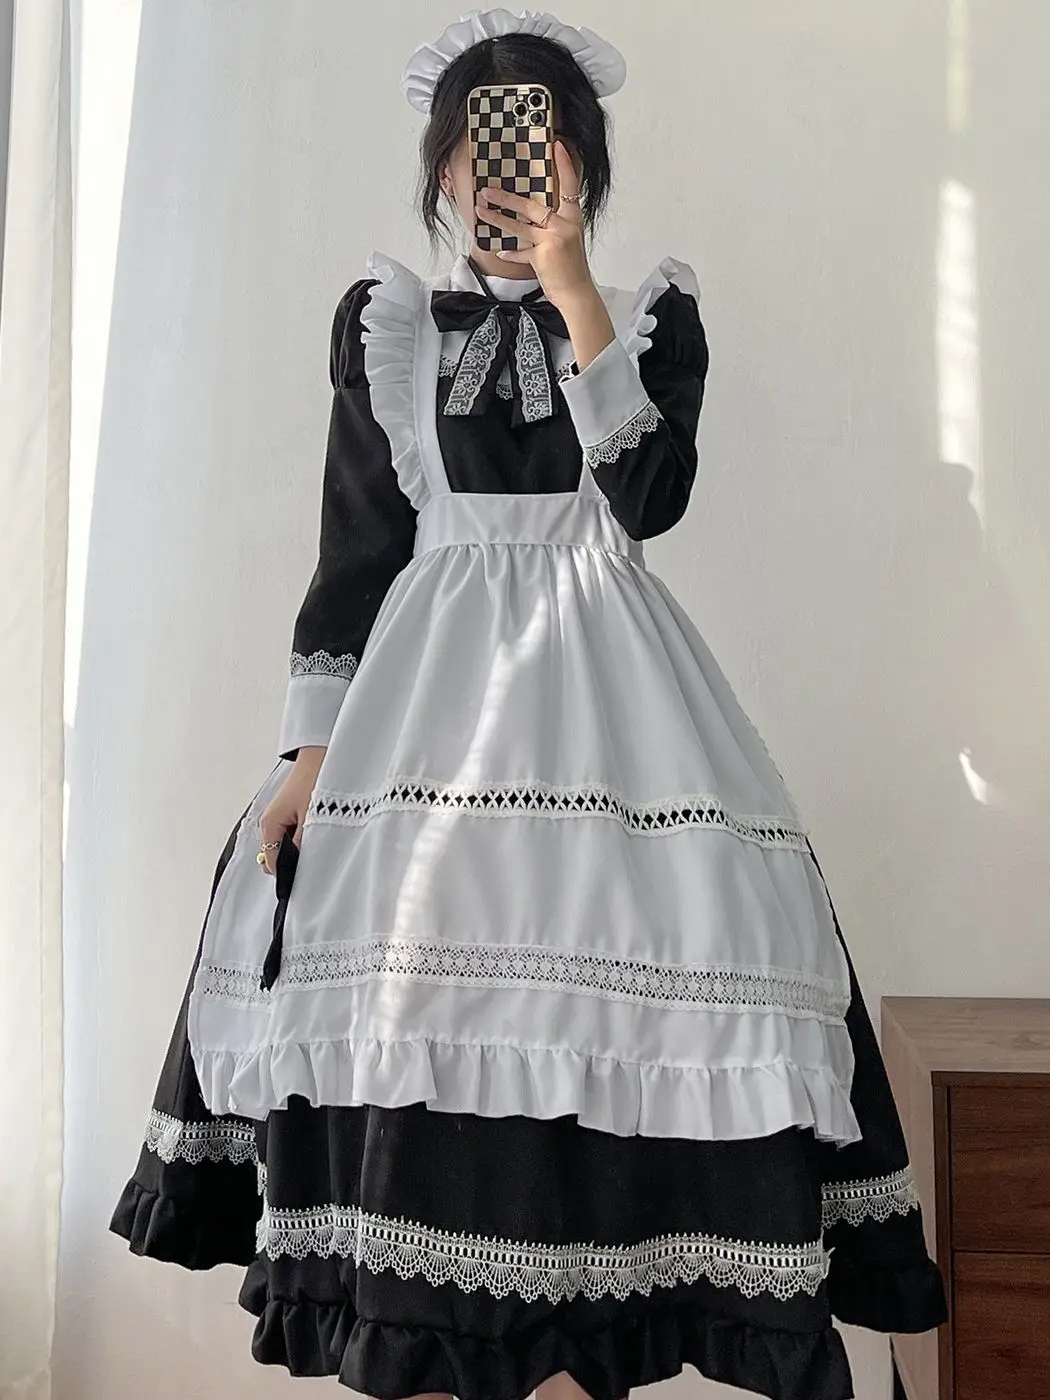 

MAGOGO British Aristocratic Long-sleeved Maid Outfit Costume Cosplay Uniform Cute Dress With Apron Size S-5XL